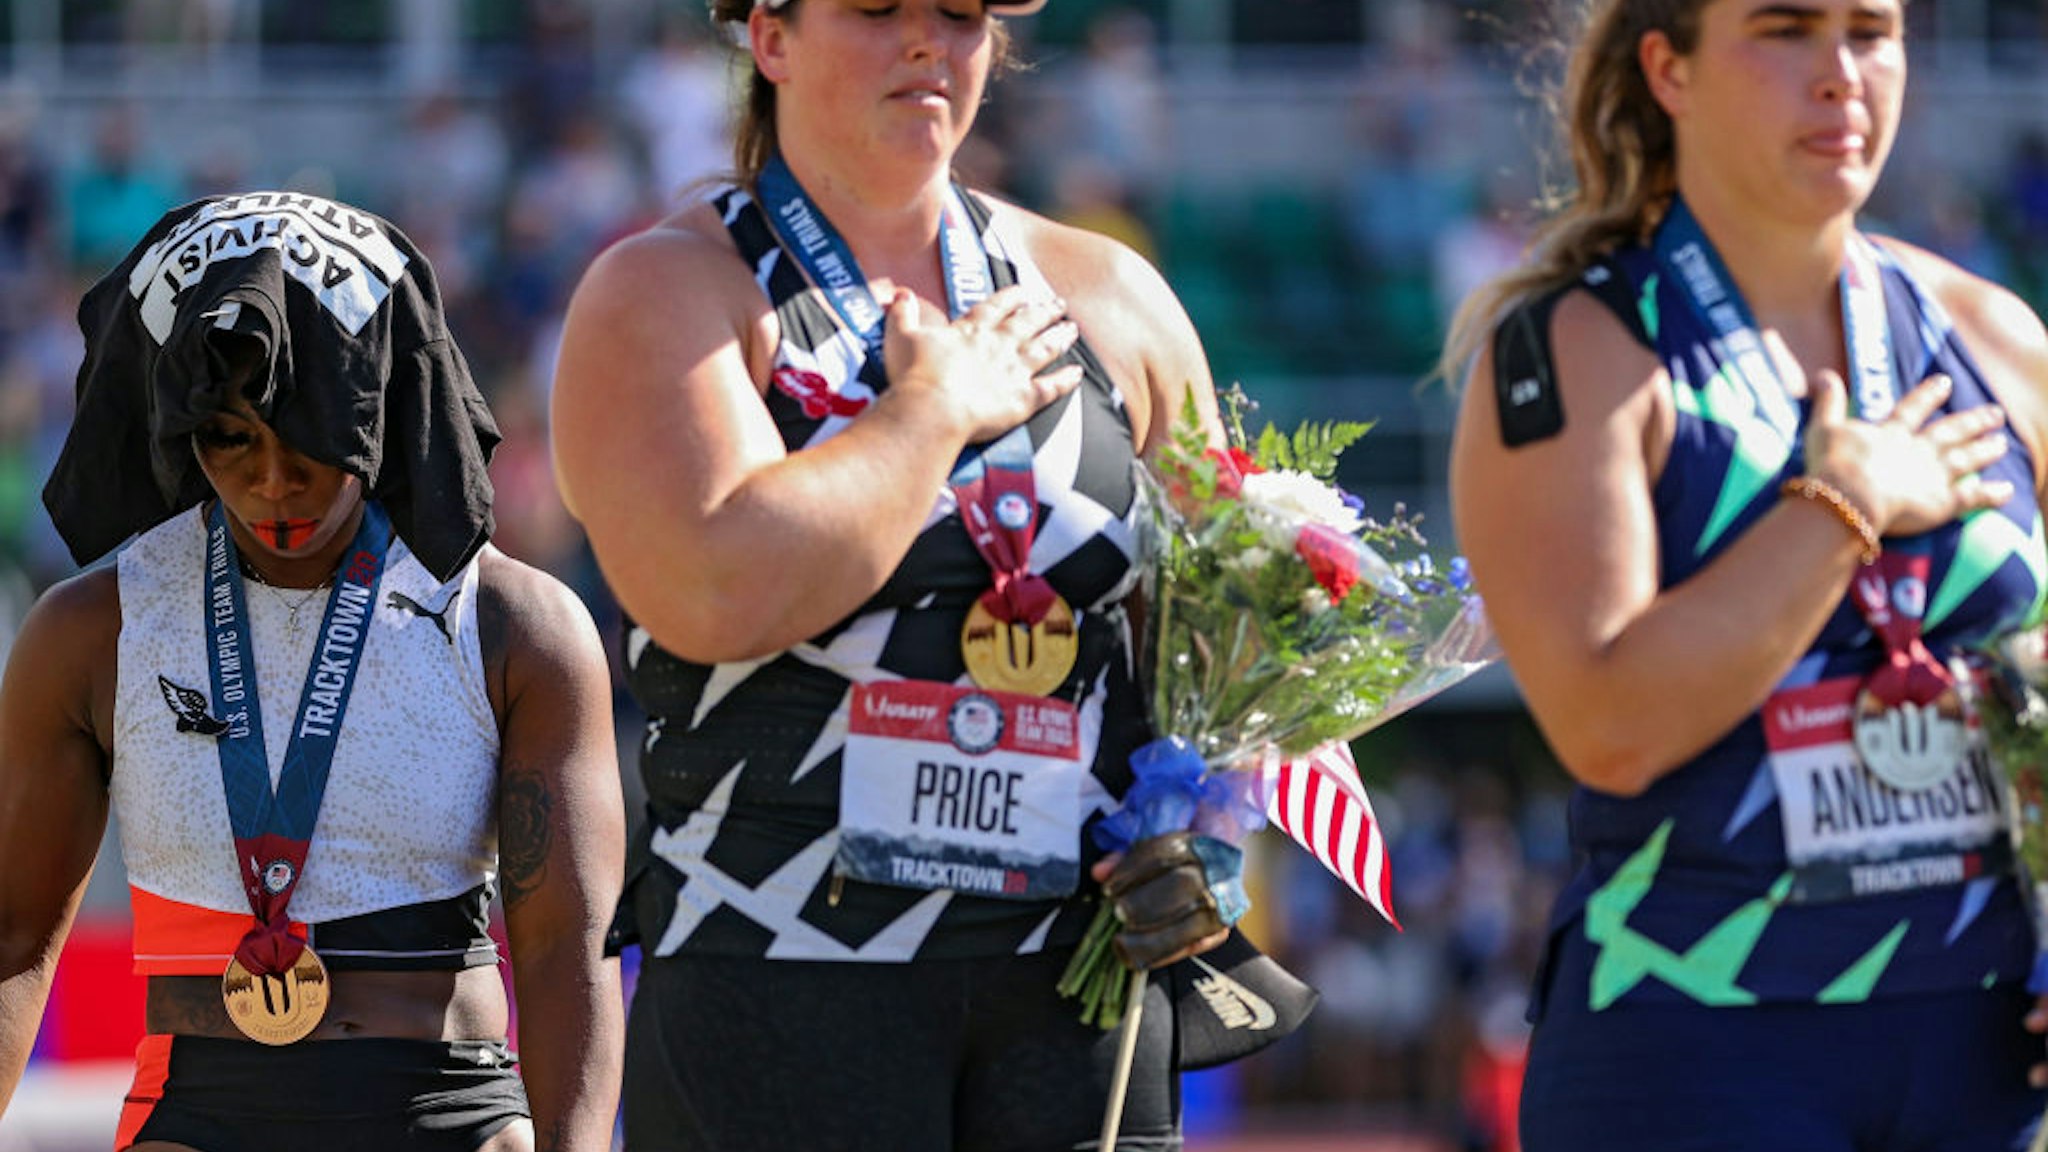 Gwendolyn Berry (L), third place, turns away from U.S. flag during the U.S. National Anthem as DeAnna Price (C), first place, and Brooke Andersen, second place, also stand on the podium after the Women's Hammer Throw final on day nine of the 2020 U.S. Olympic Track & Field Team Trials at Hayward Field on June 26, 2021 in Eugene, Oregon.